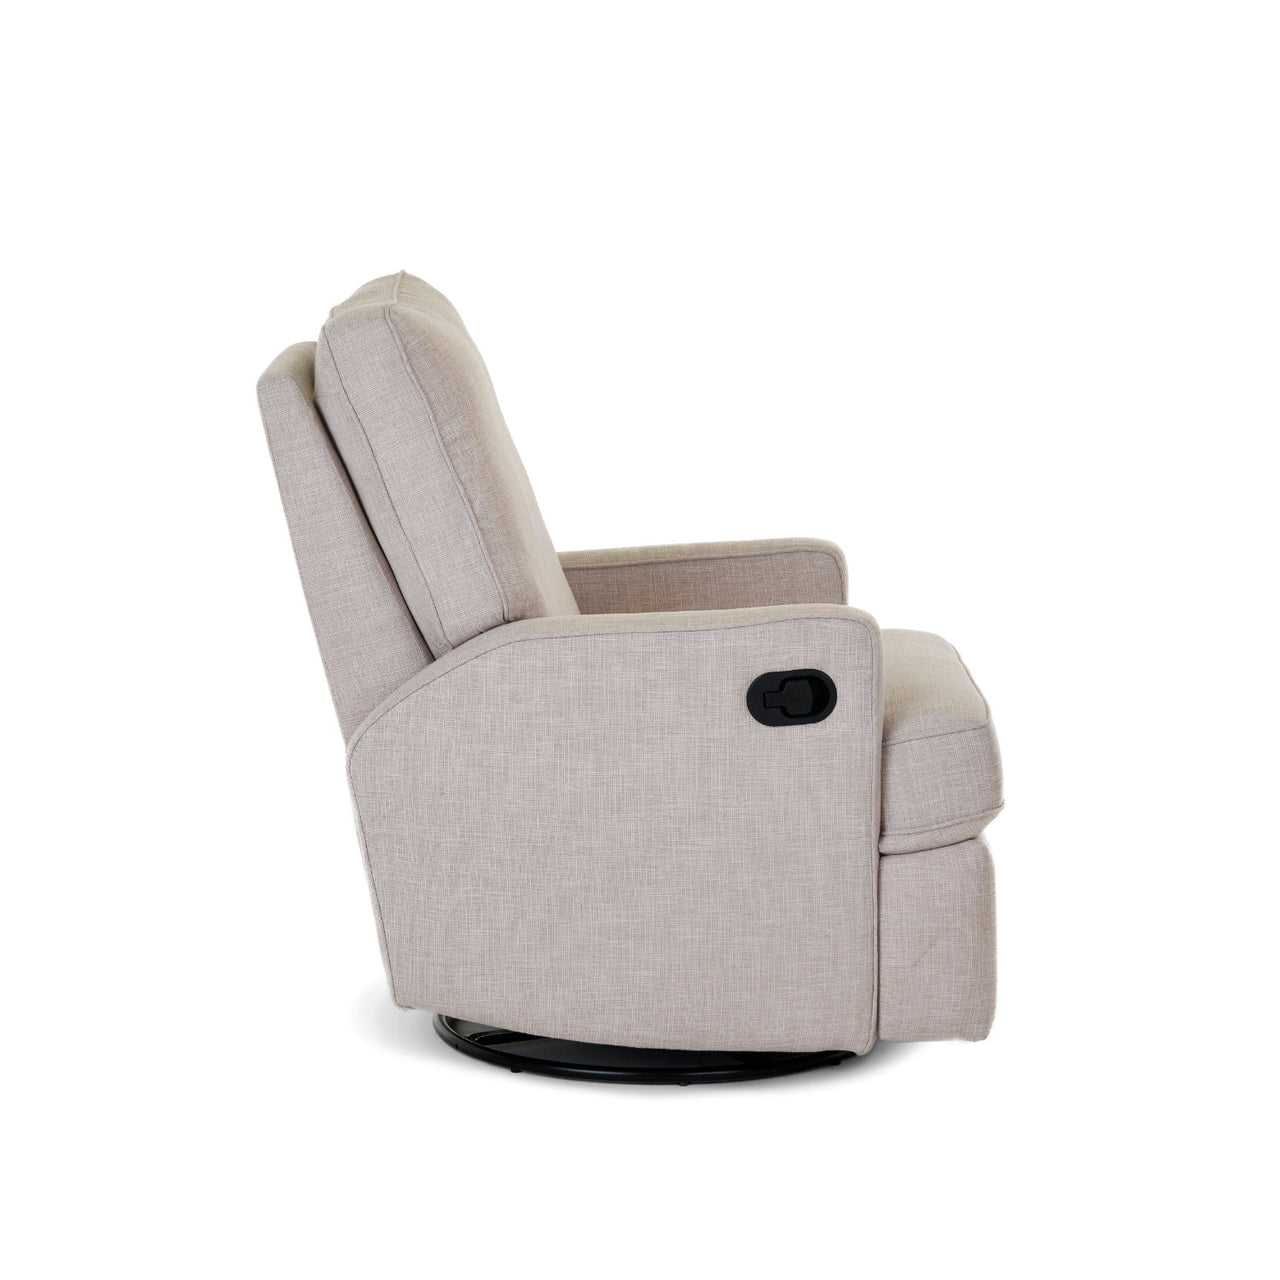 Obaby Madison Swivel Glider Recliner Chair Oatmeal